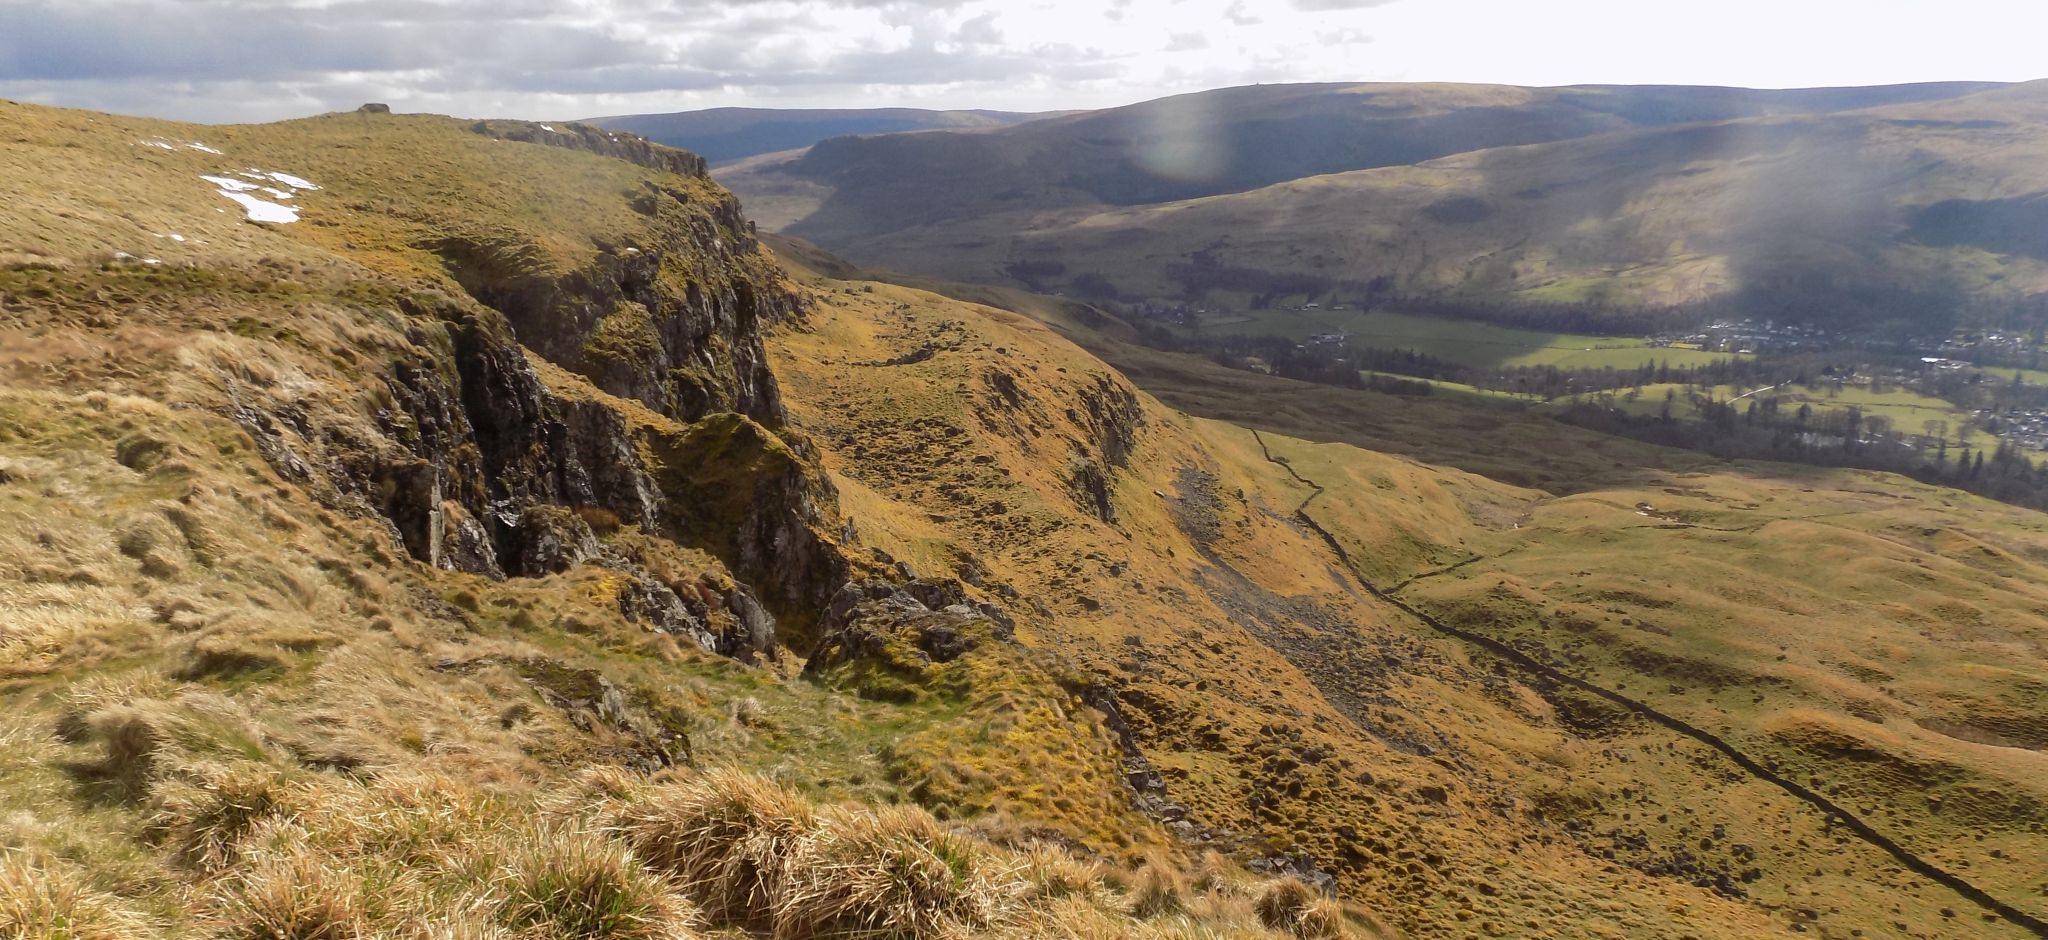 Escarpment beneath Stronend in the Fintry Hills from the Campsie Fells